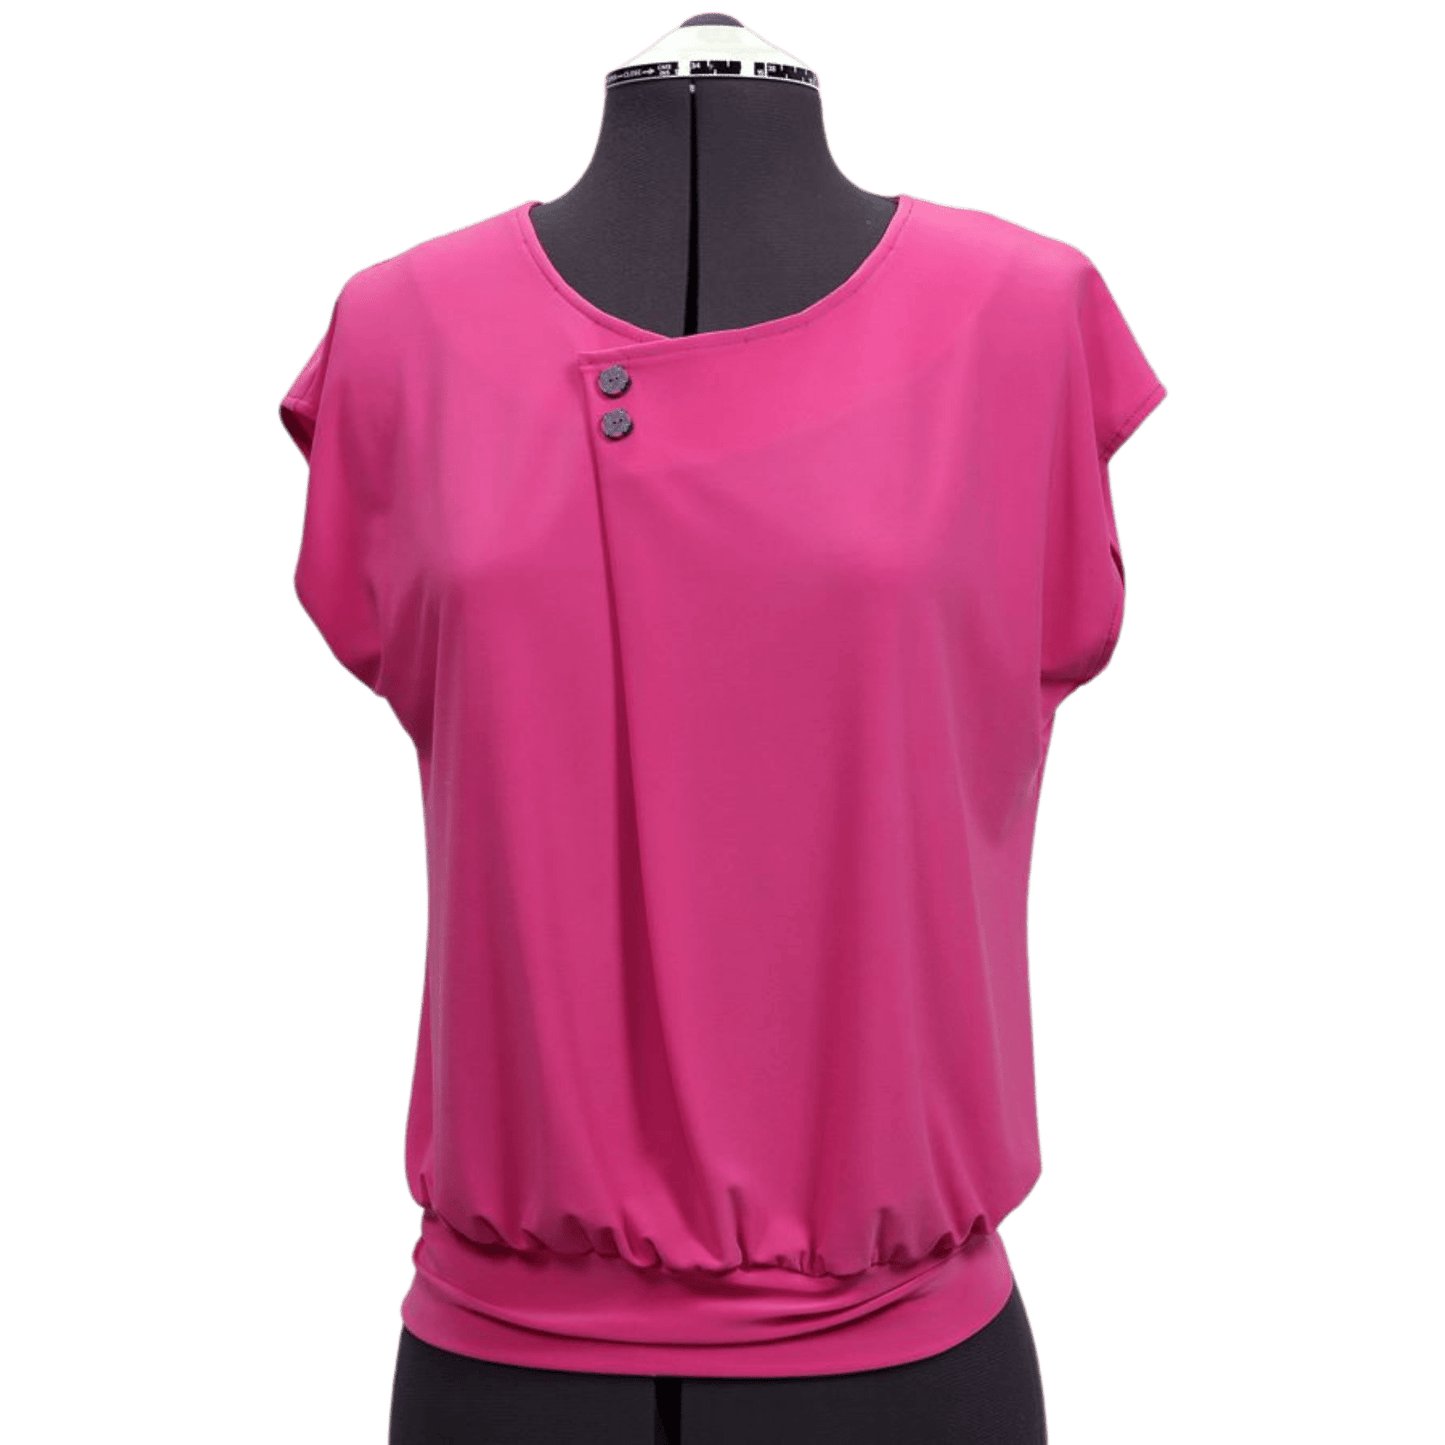 A pink shirt on a mannequin with two buttons on the left neckline